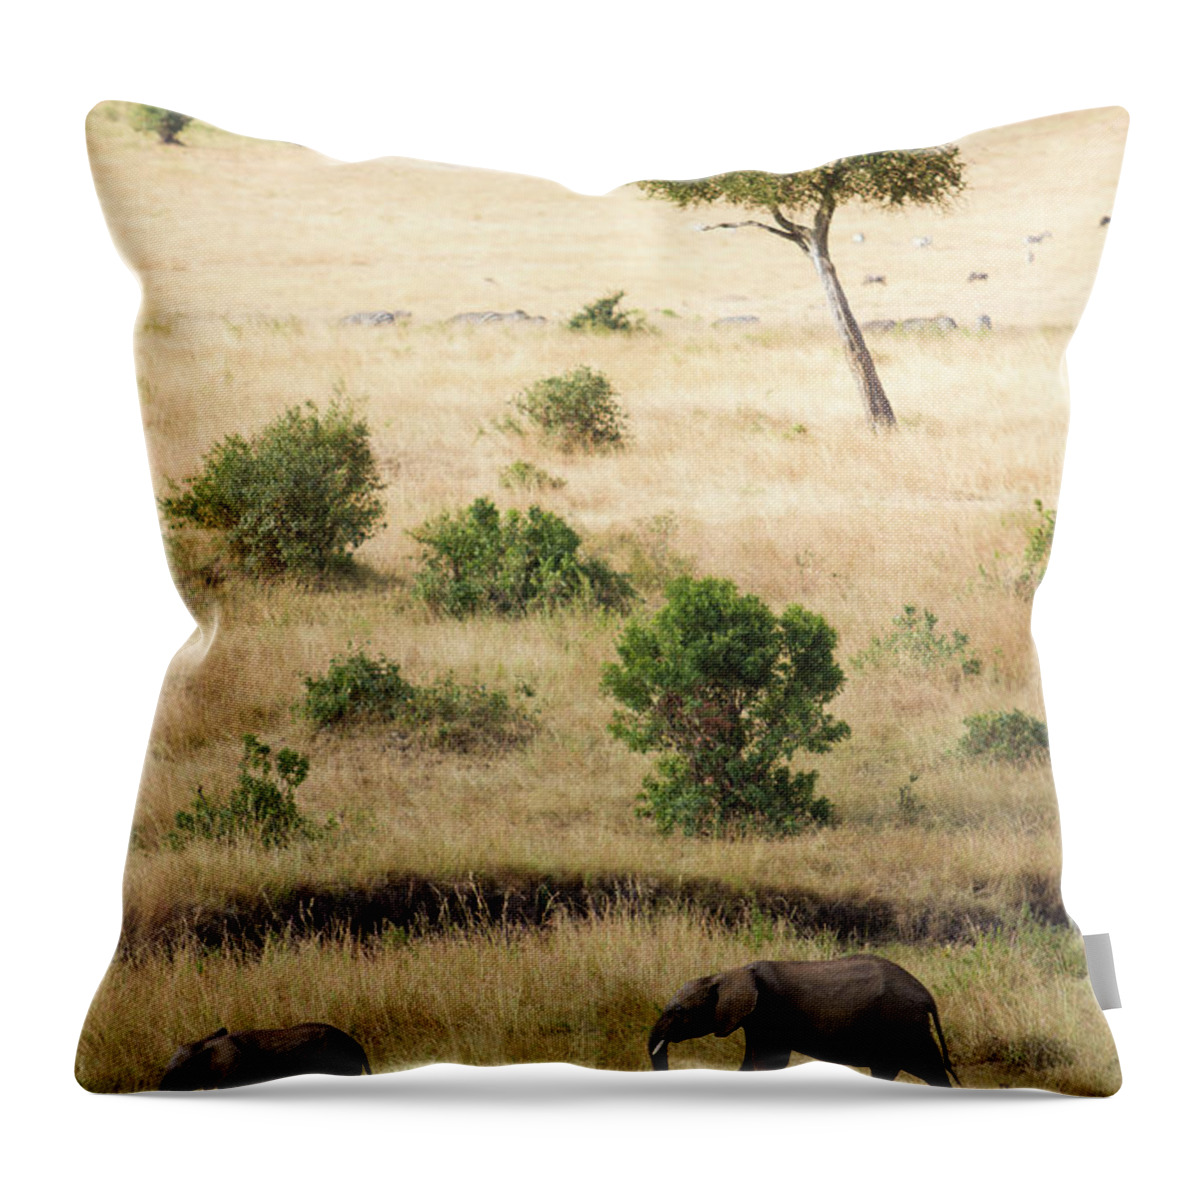 Kenya Throw Pillow featuring the photograph Mother And Baby Elephant In Savanna by Universal Stopping Point Photography